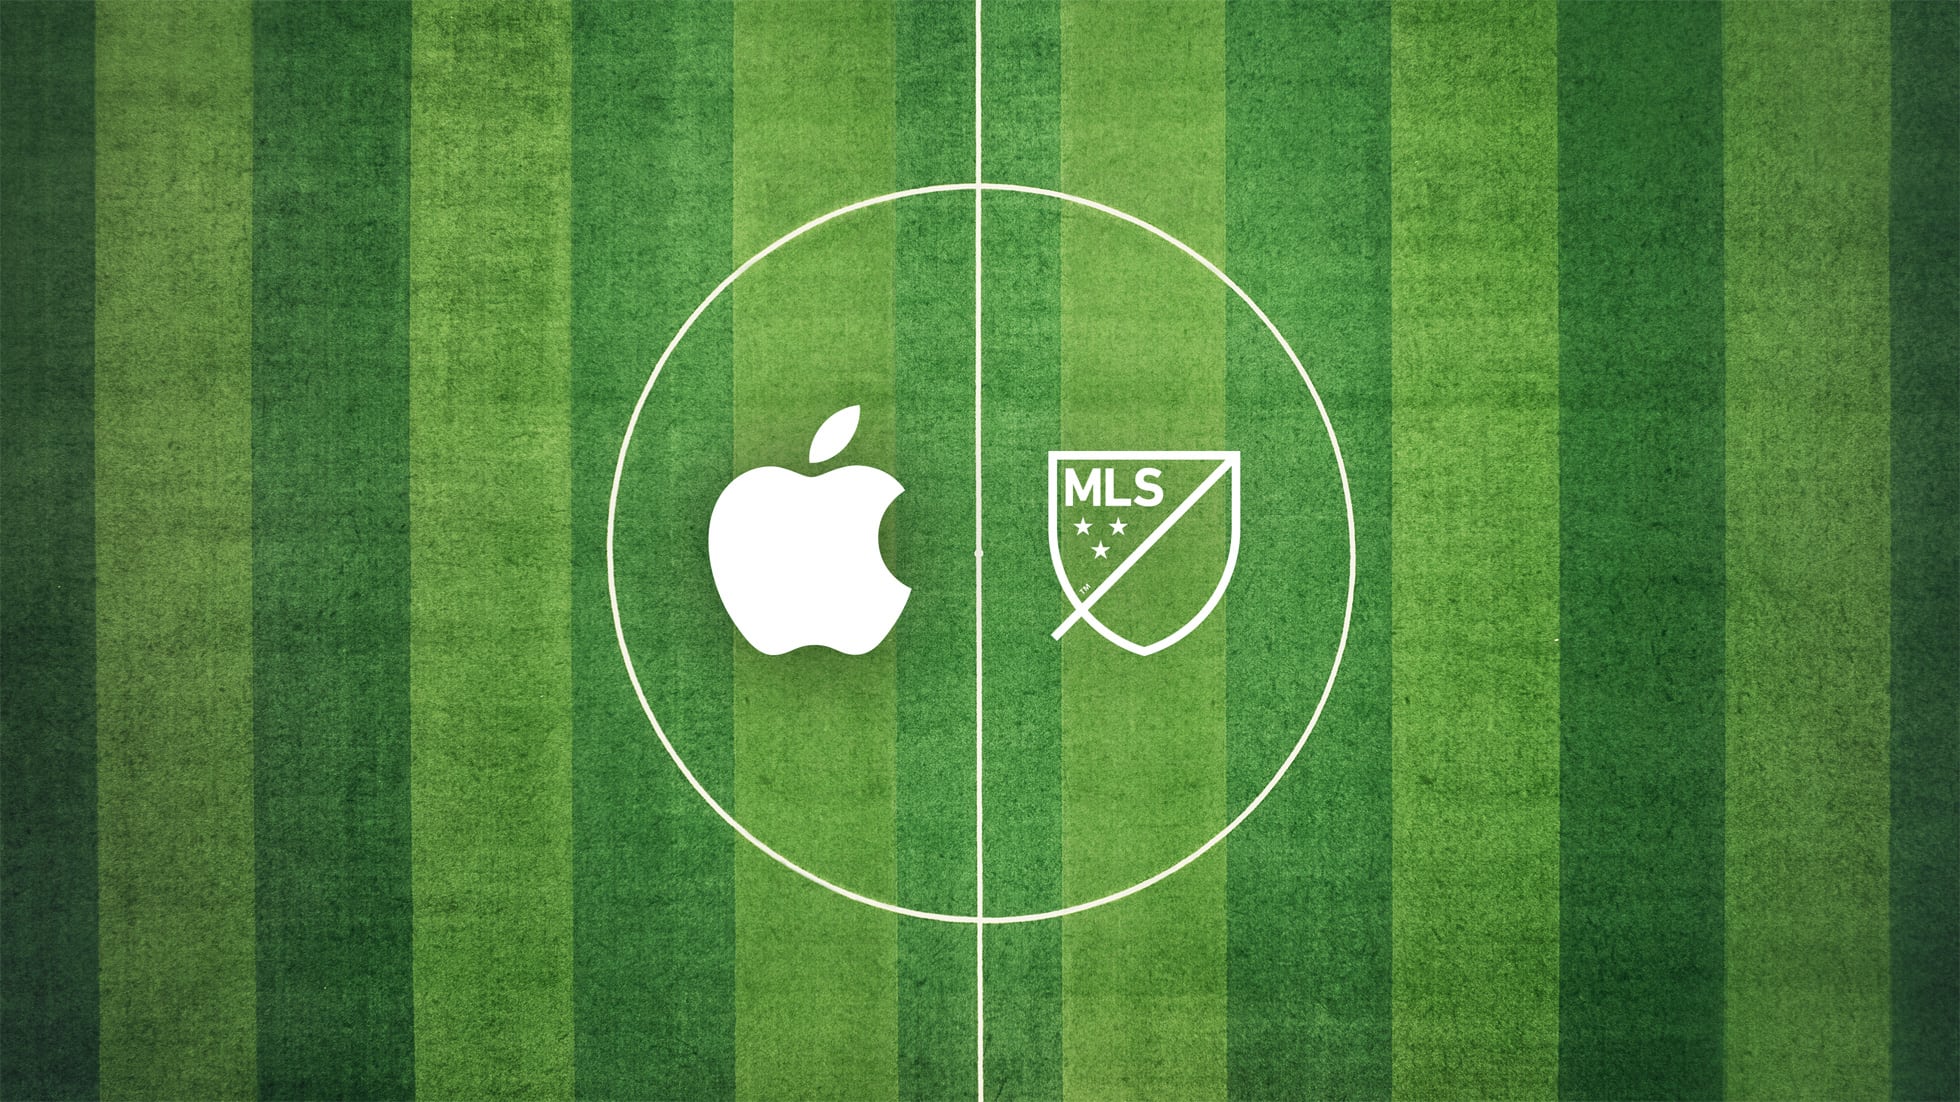 Apple to present all Major League Soccer matches around the world in 2023 for the next decade